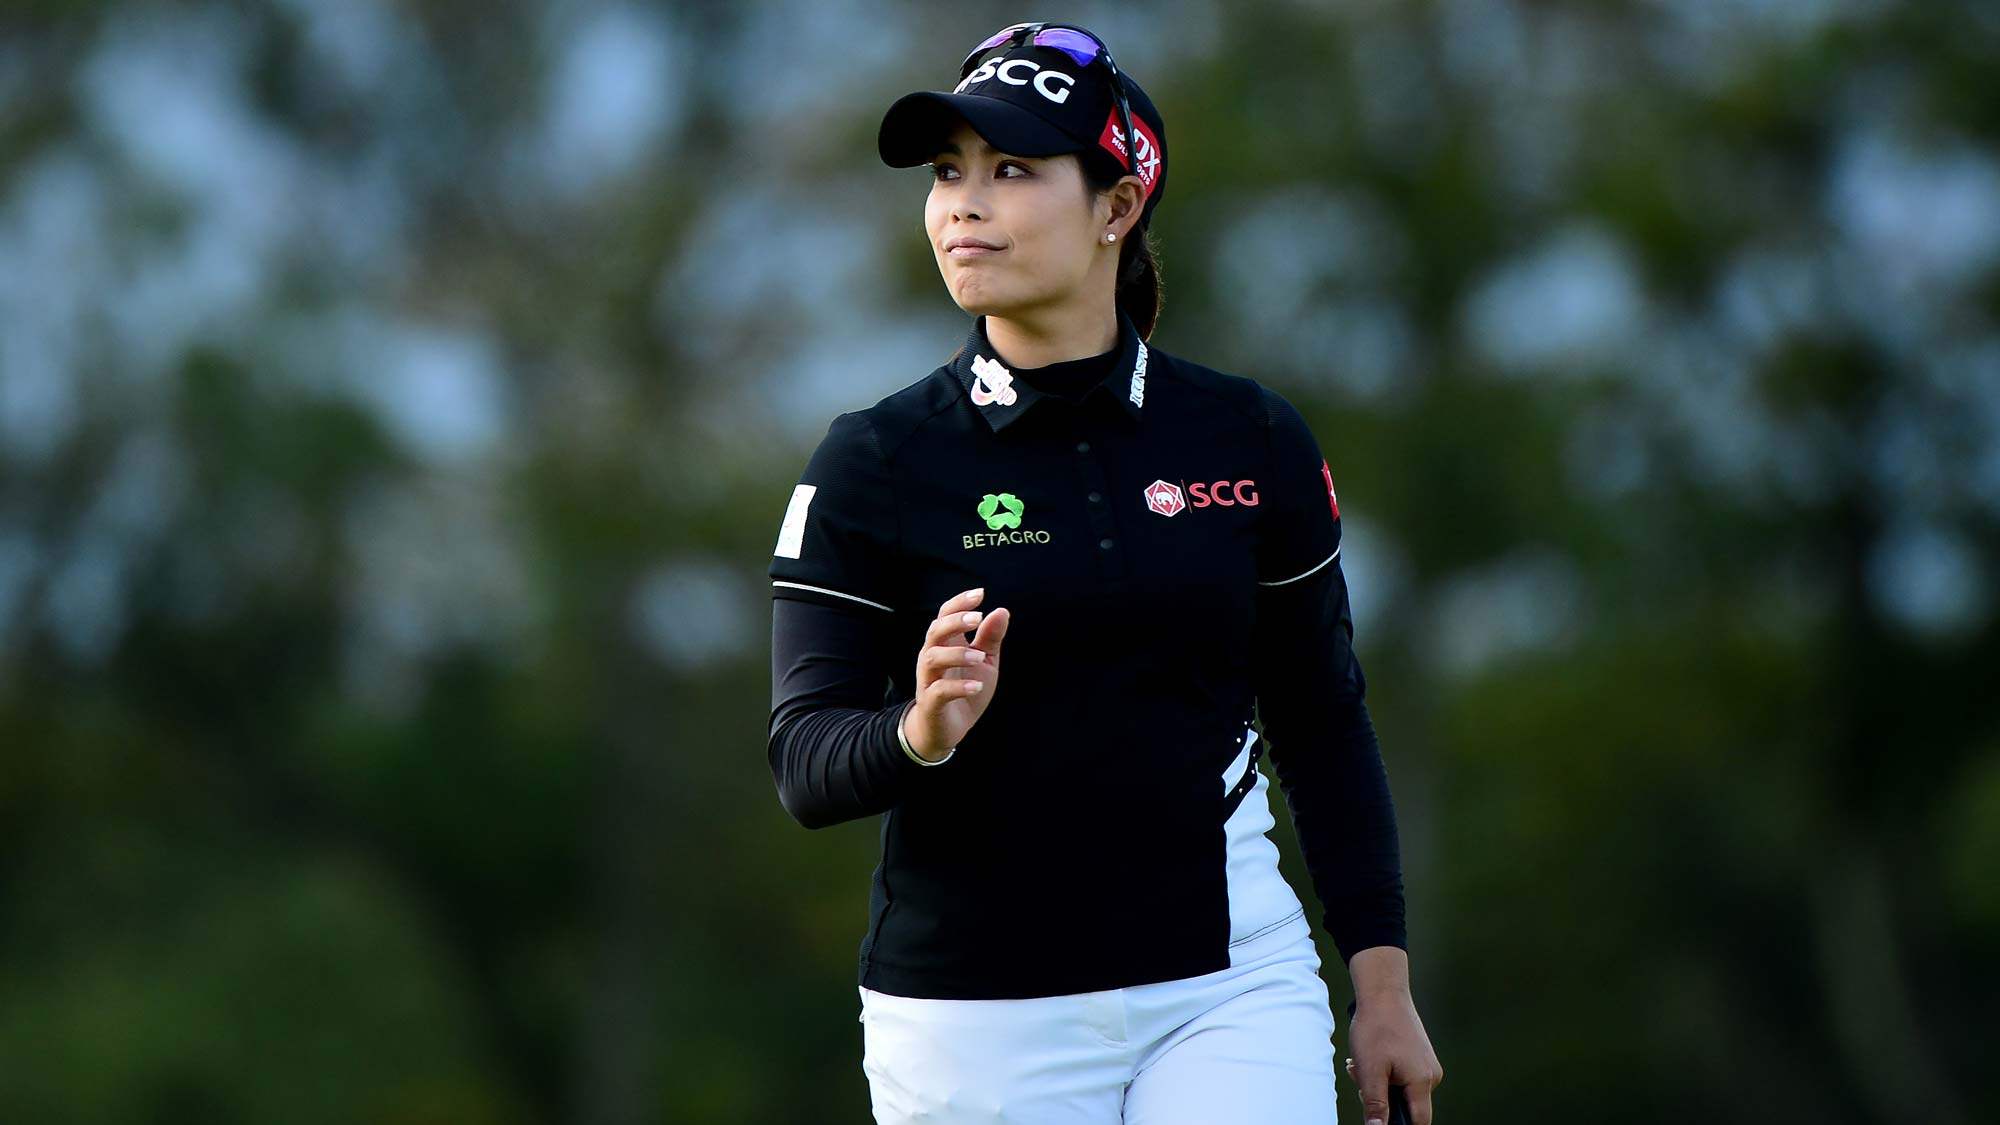 Moriya Jutanugarm of Thailand waves at the 18th hole during the Aberdeen Standard Investment Scottish Open